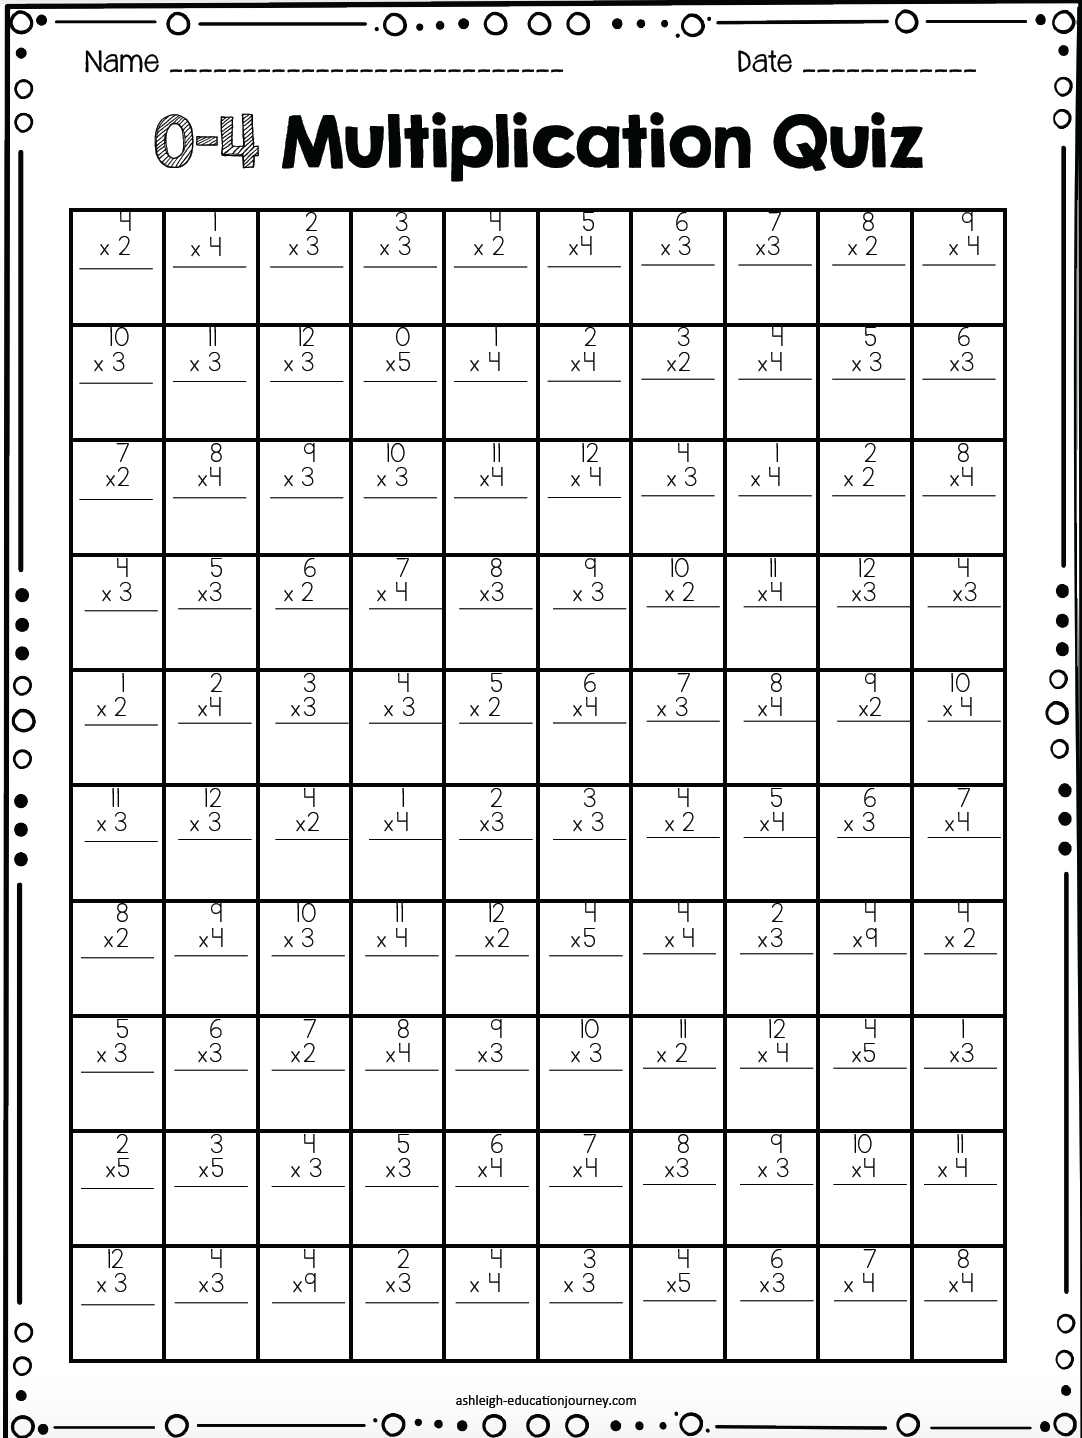 Multiplication Drills 1 12 Times Tables Worksheets Multiplication Drill X3 X4 And X6 Worksheet